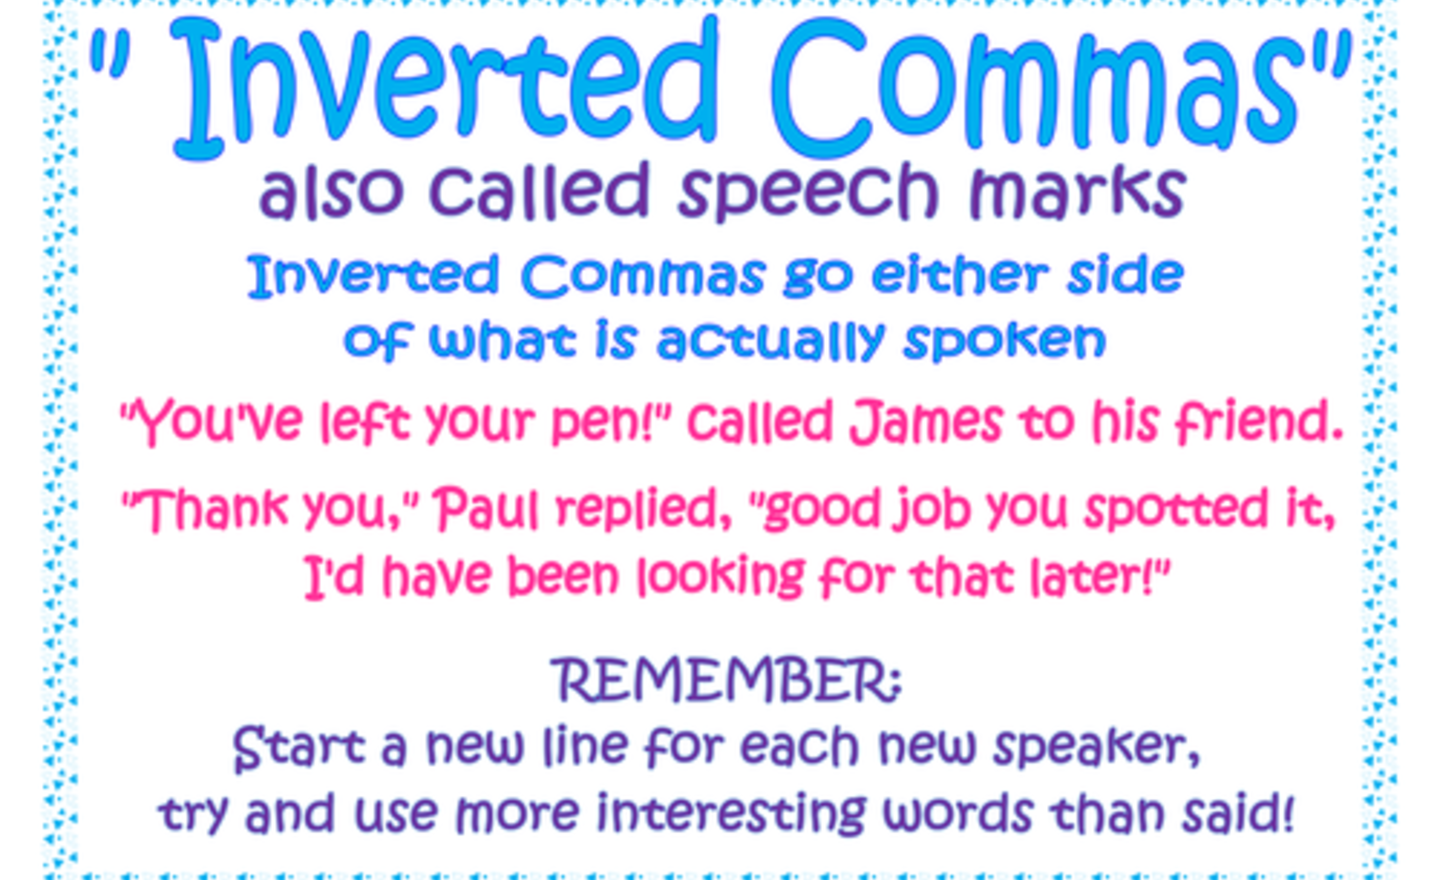 Image of Inverted Commas